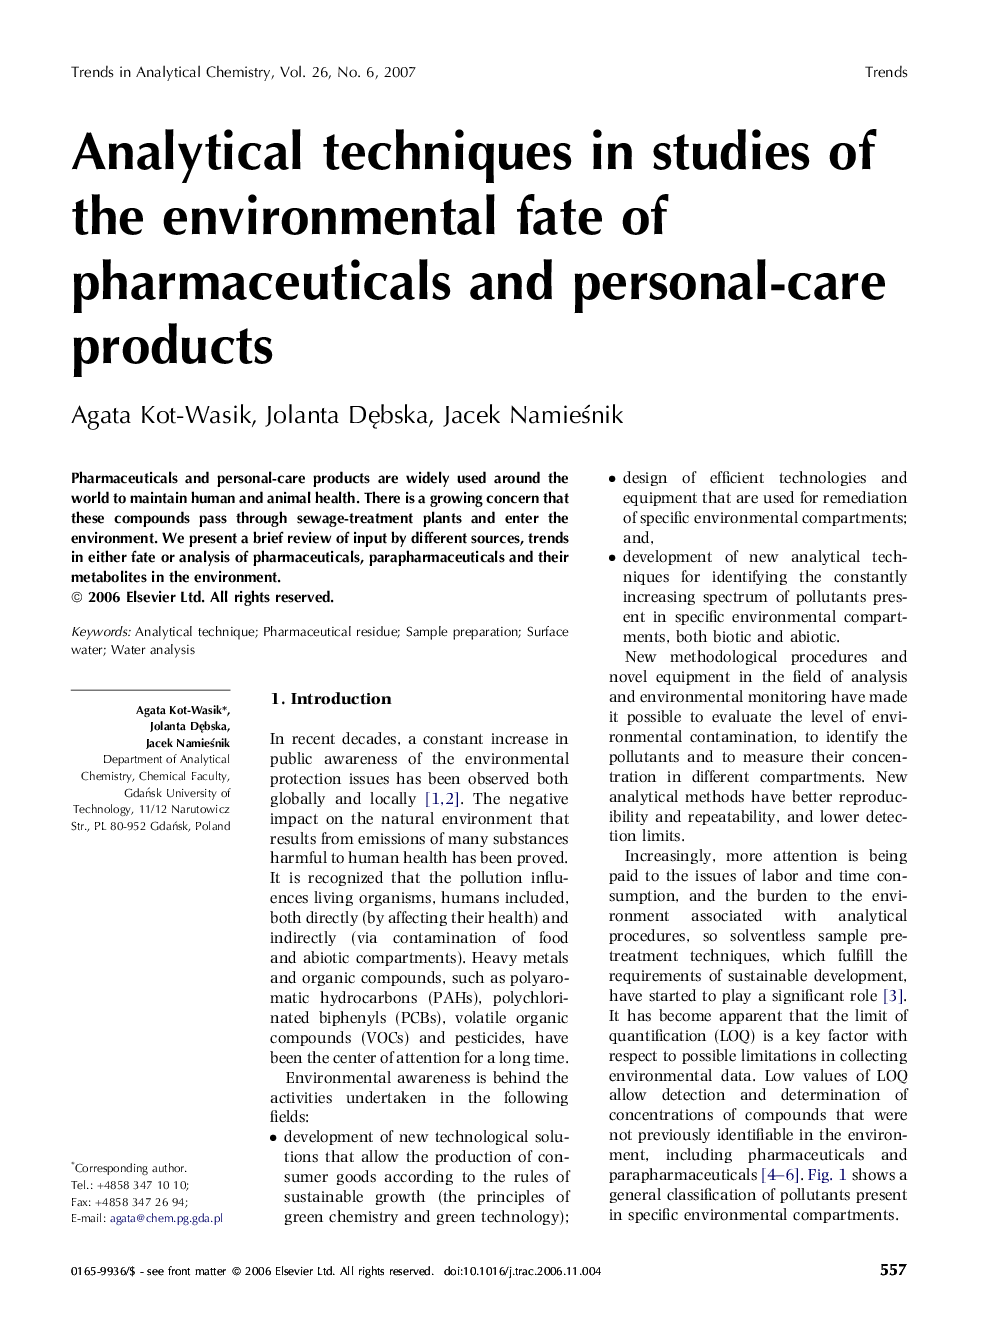 Analytical techniques in studies of the environmental fate of pharmaceuticals and personal-care products